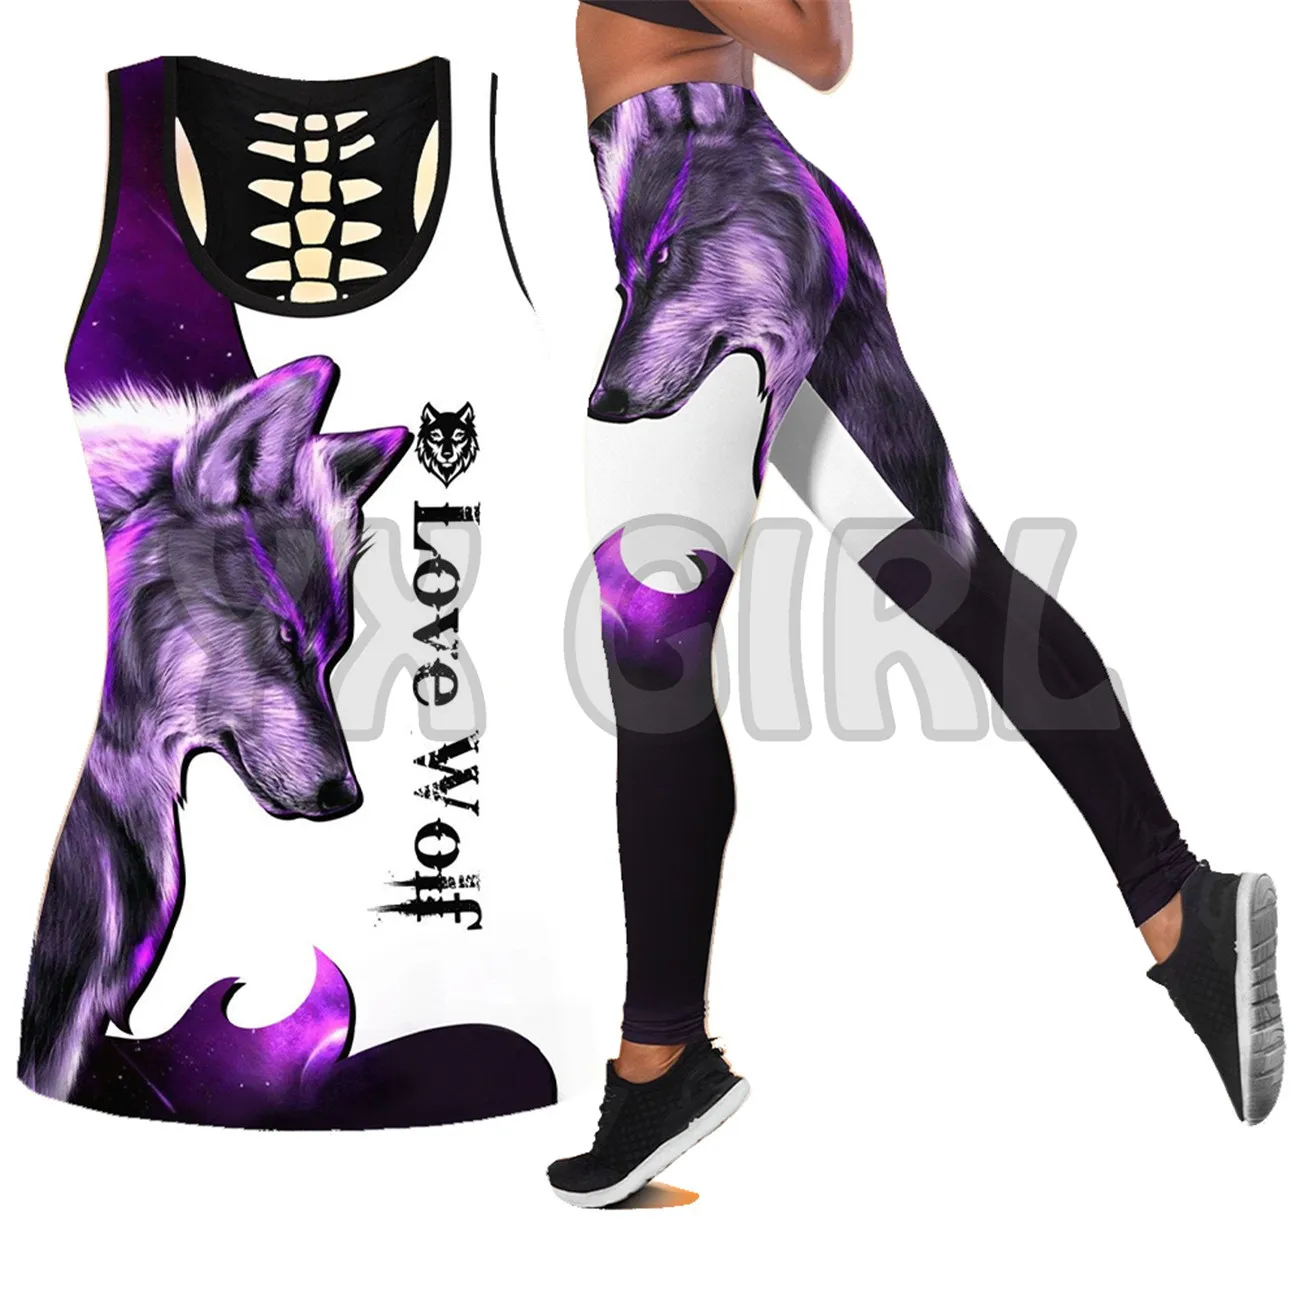 Love Wolf   3D Printed Tank Top+Legging Combo Outfit Yoga Fitness Legging Women